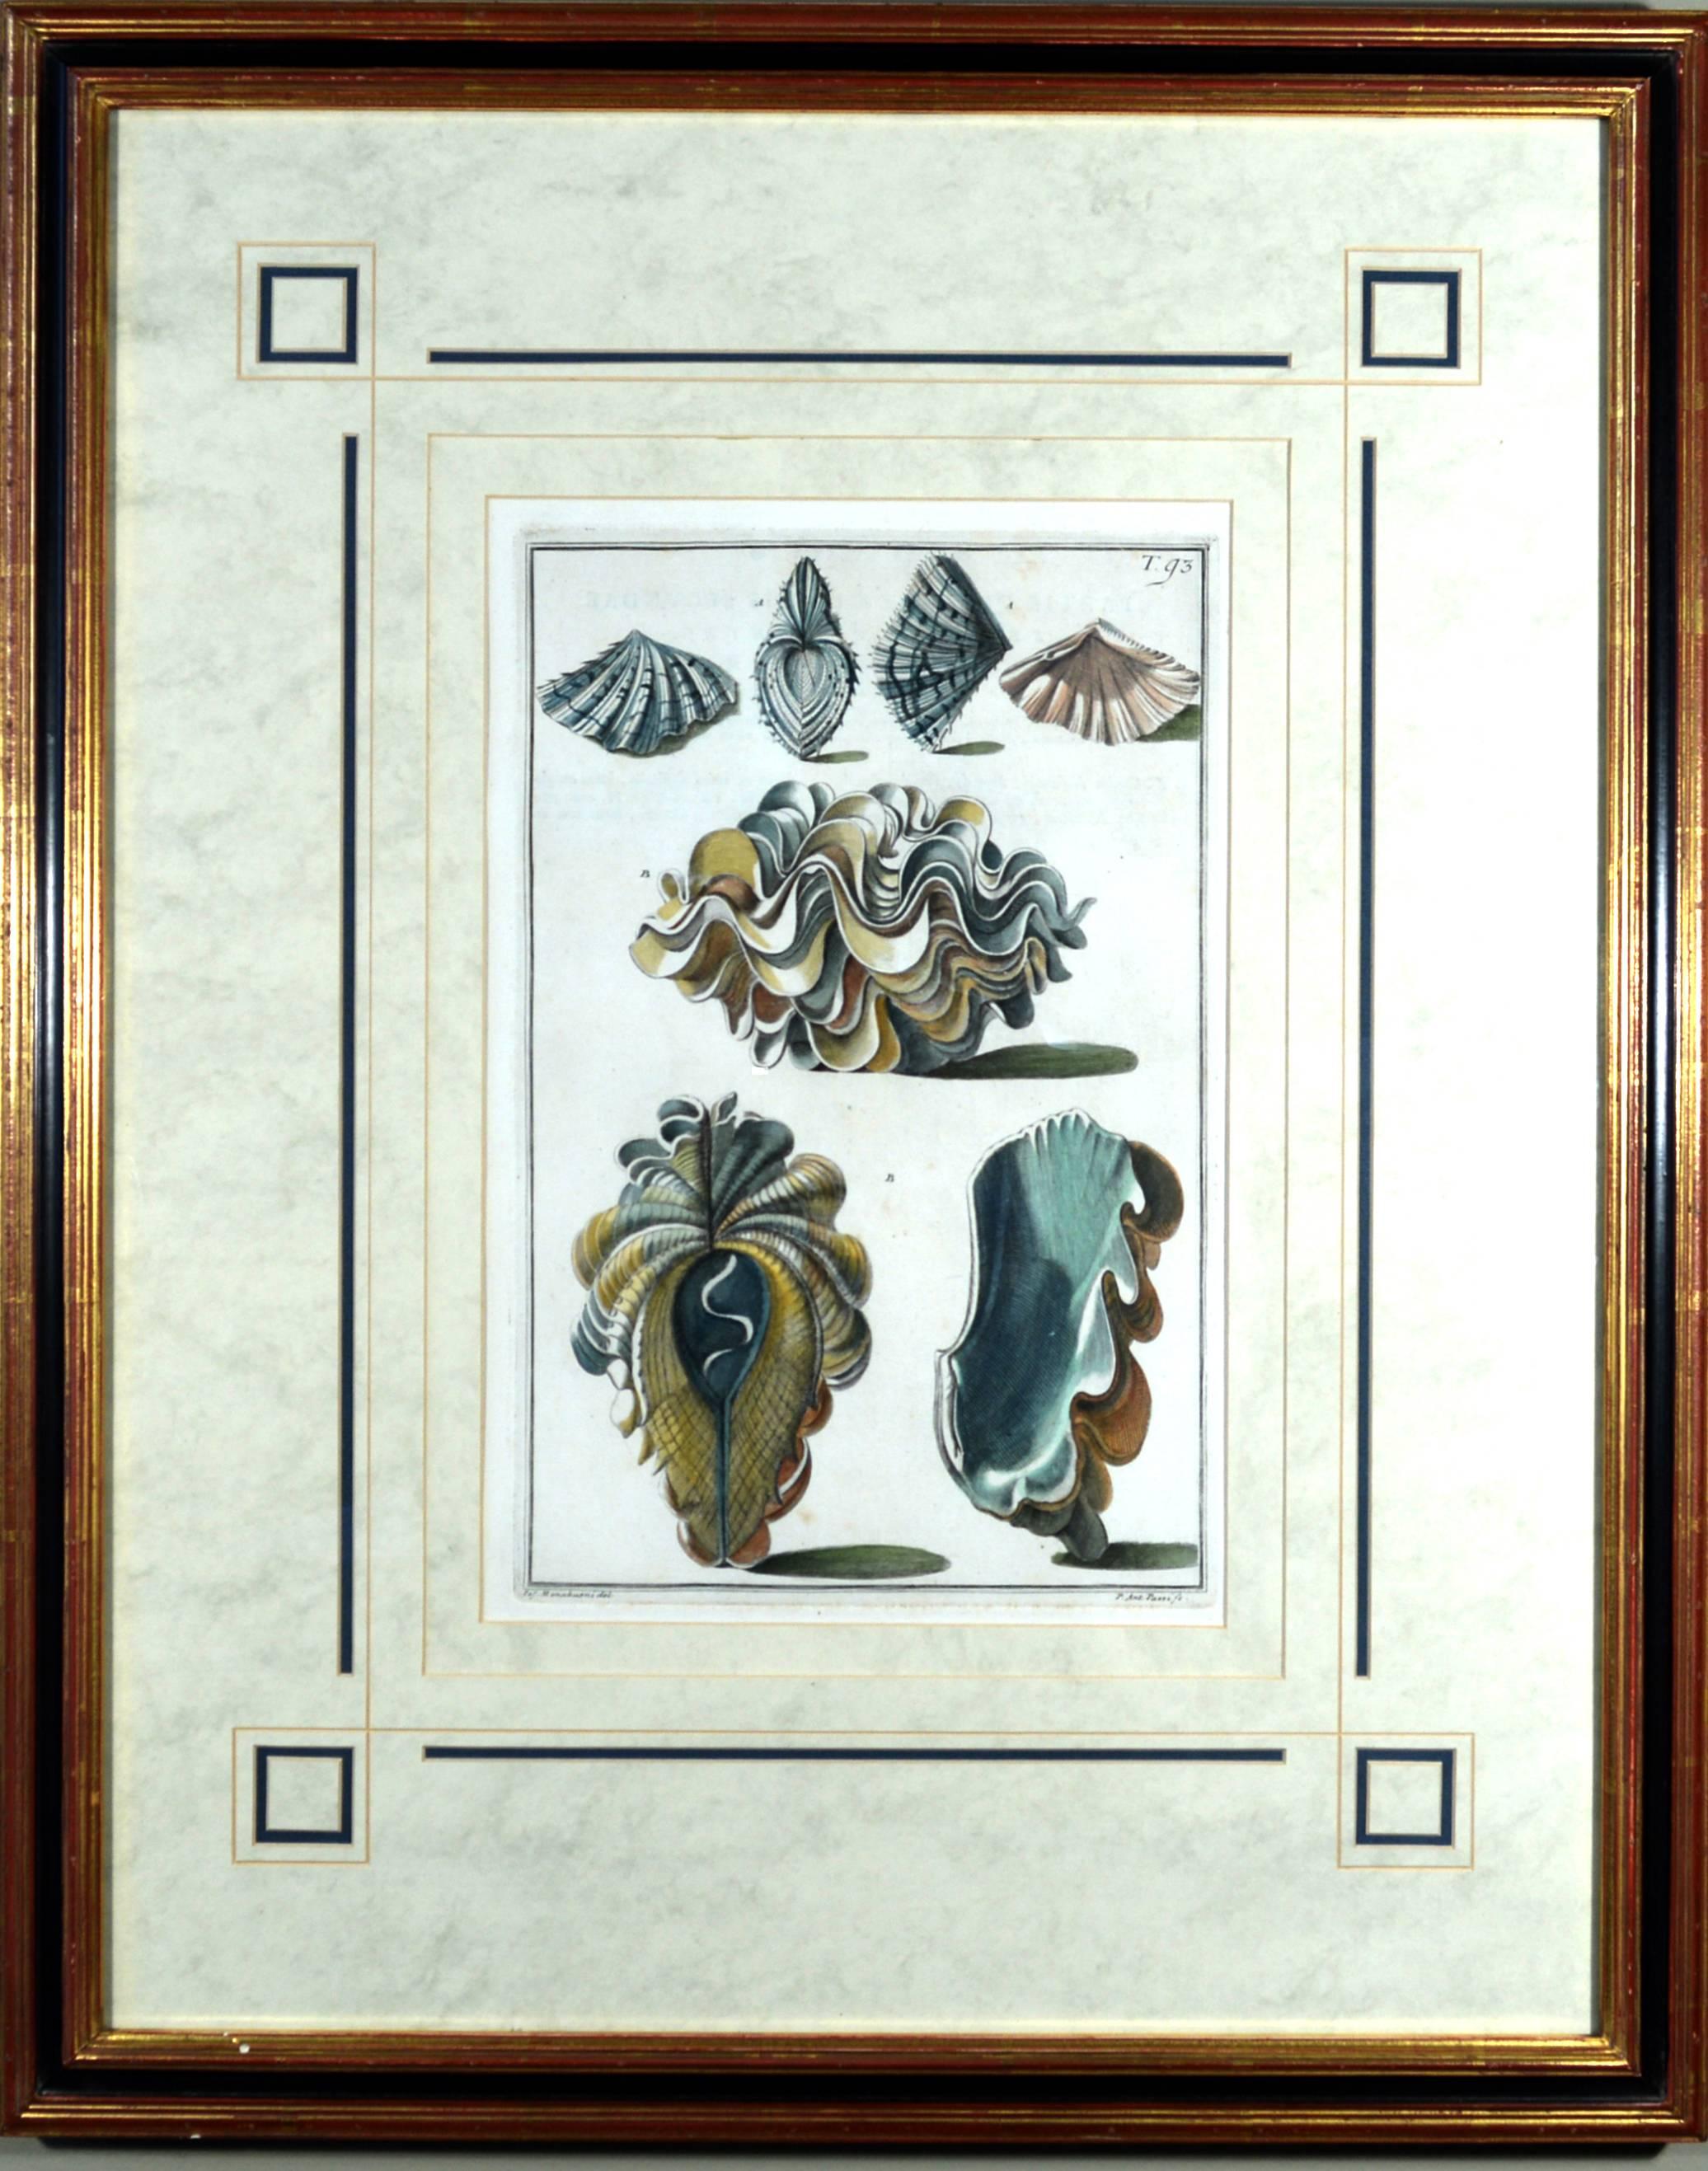 Sea shell pair of engravings,
from Index Testarum Conchyliorum by Niccolo Gualtieri,
Engraved by Antonio Pazzi & Giuseppe Menabuoni,
1742.

Pair of framed hand colored sea shell prints from Index Testarum Conchyliorum by Niccolo Gualtieri,